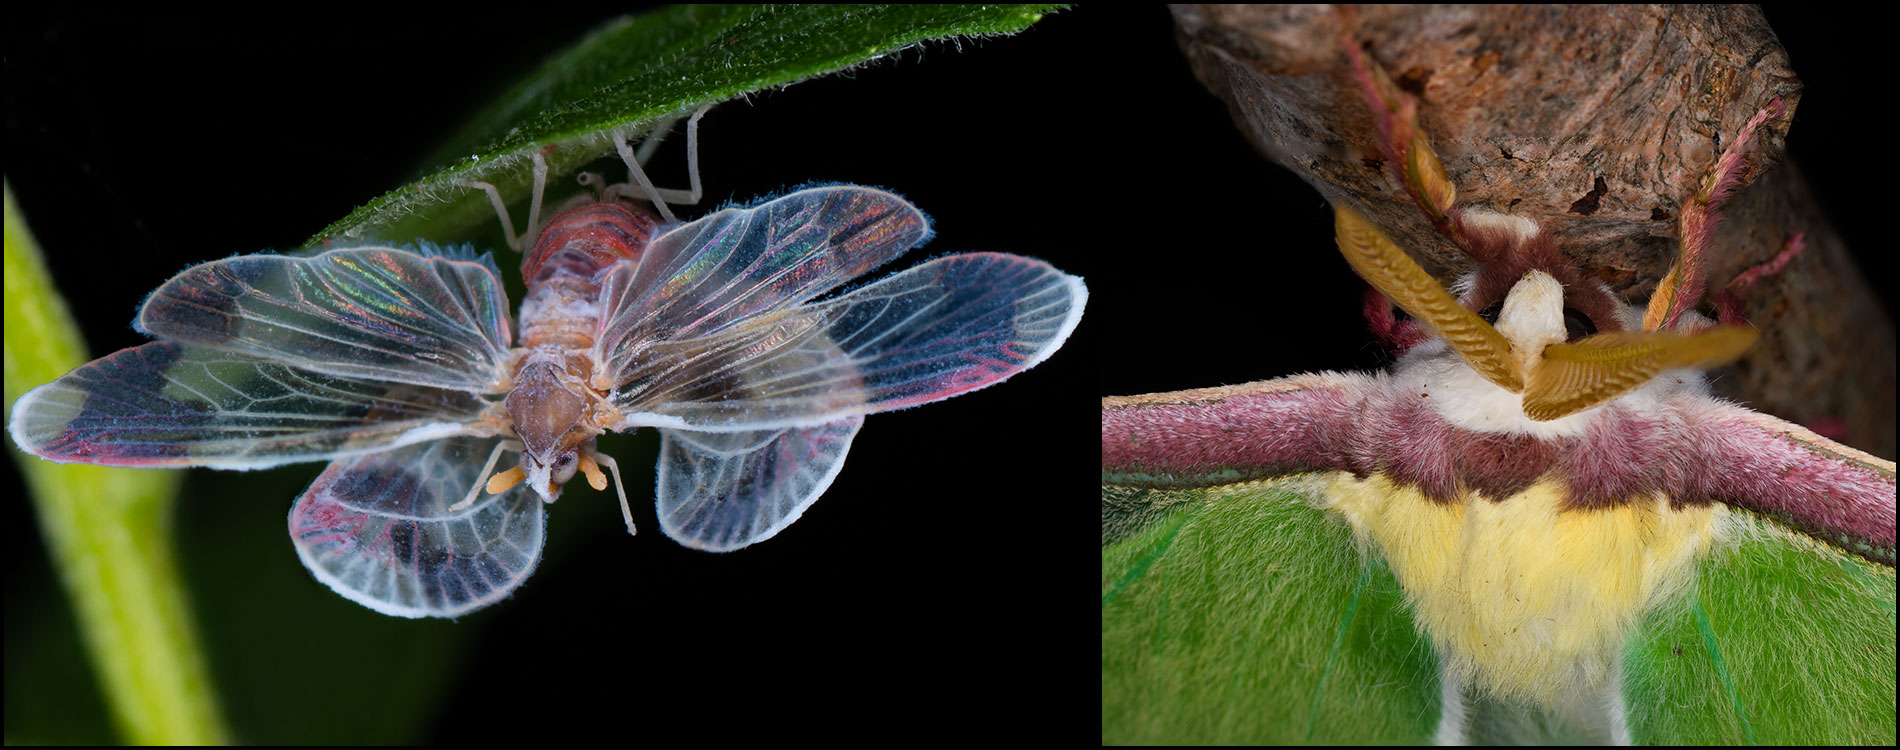 insects_1900x750